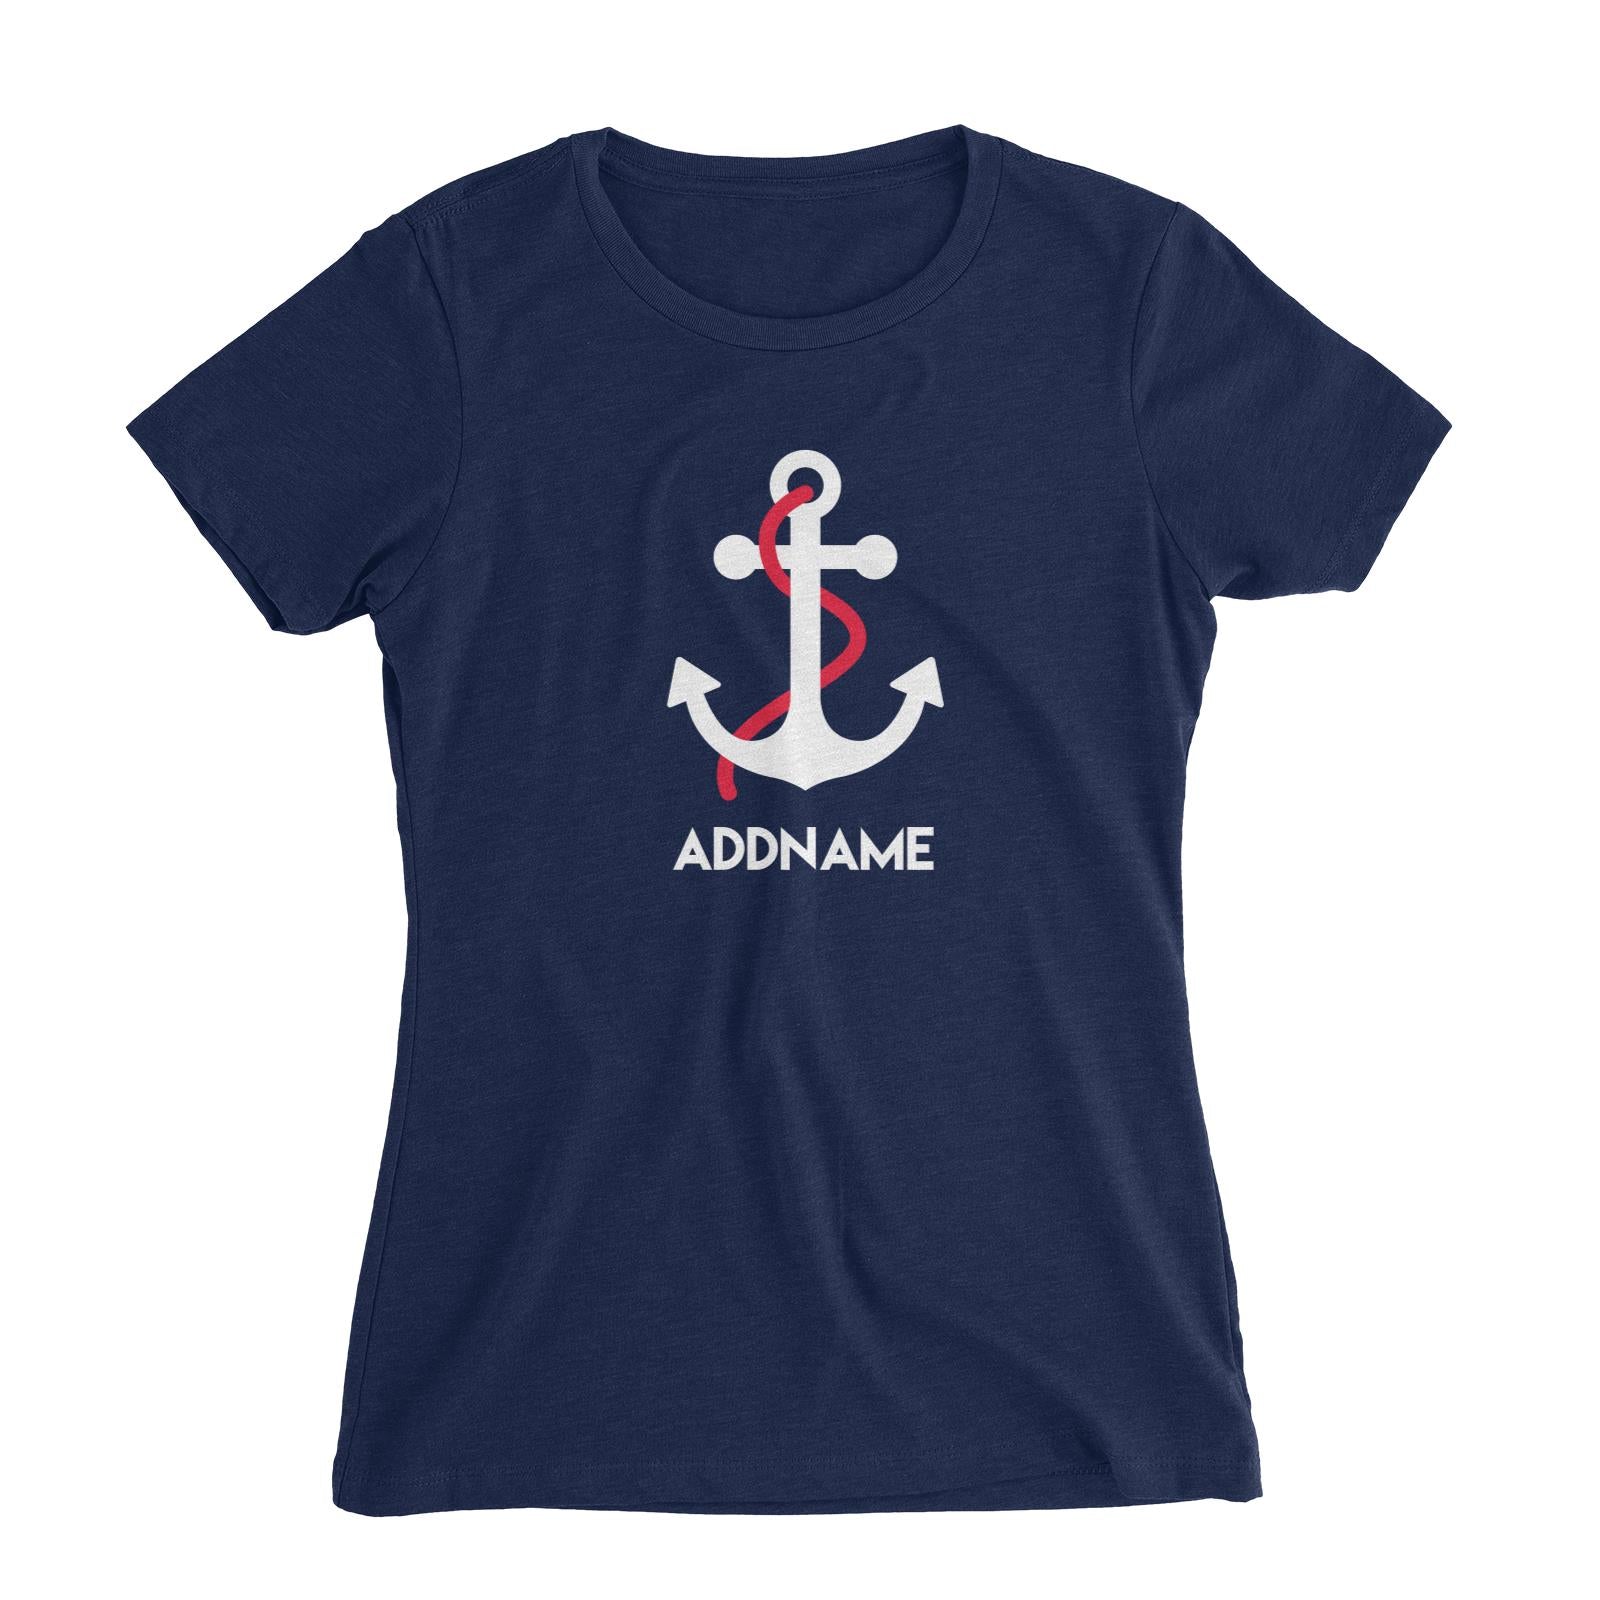 Sailor Anchor Red Addname Women's Slim Fit T-Shirt  Matching Family Personalizable Designs